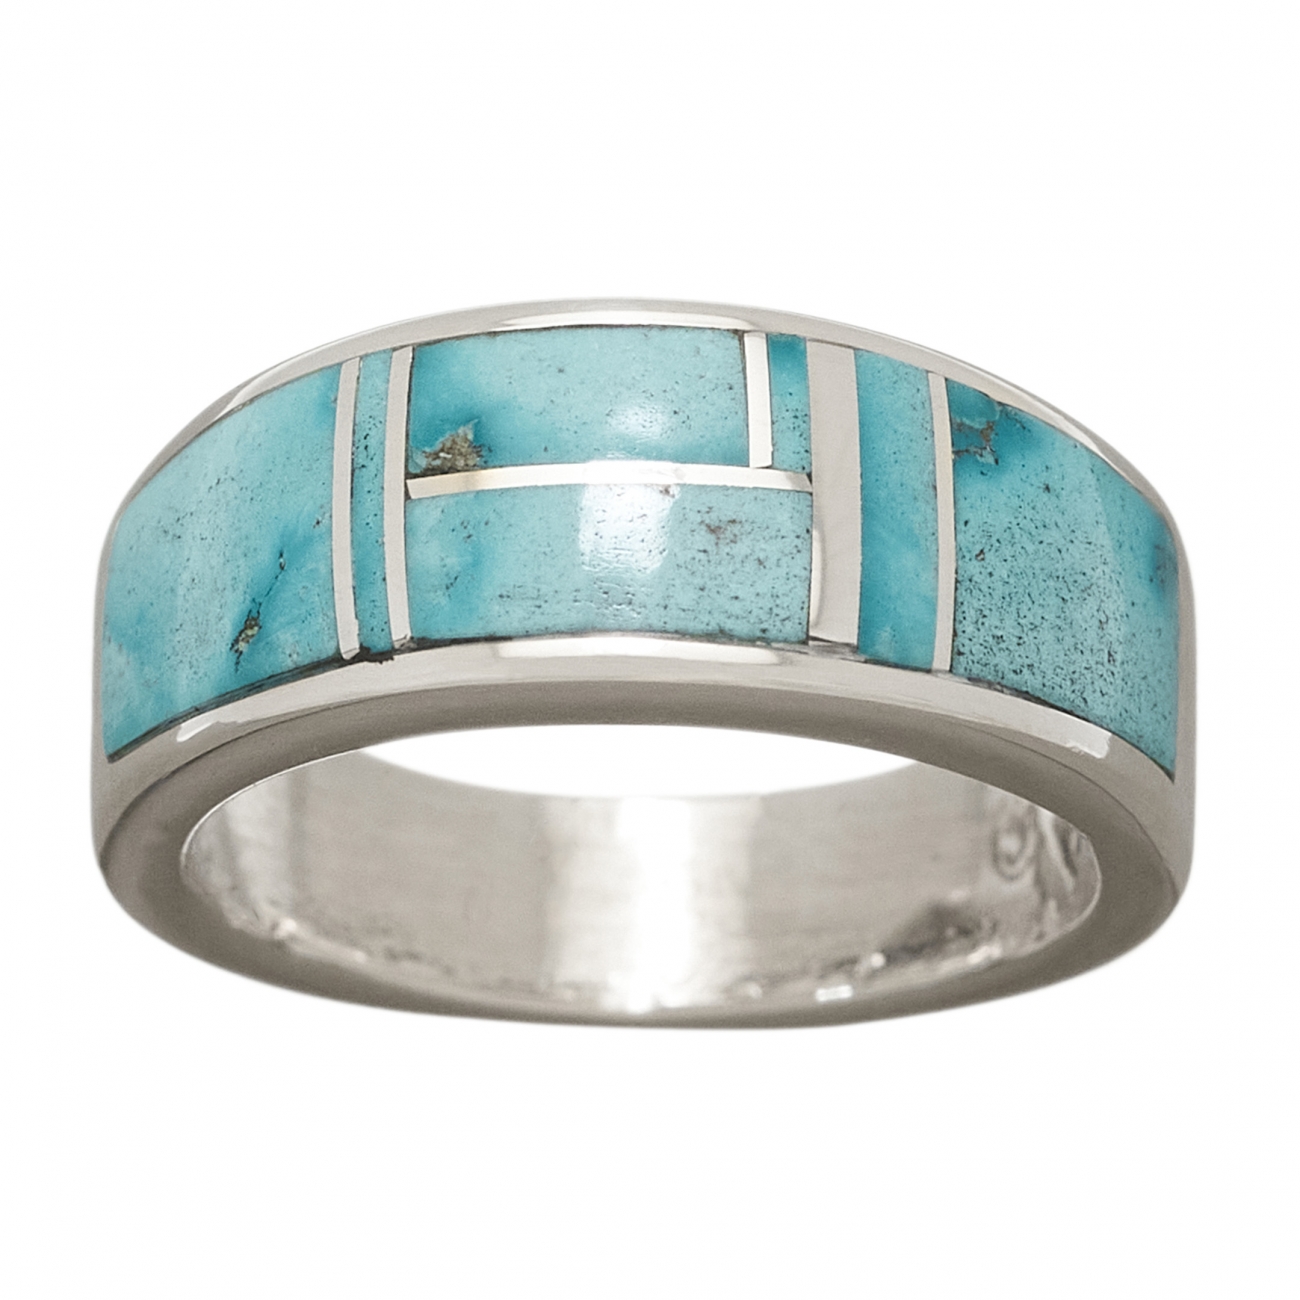 Navajo ring BA1258 in turquoise and silver inlay - Harpo Paris